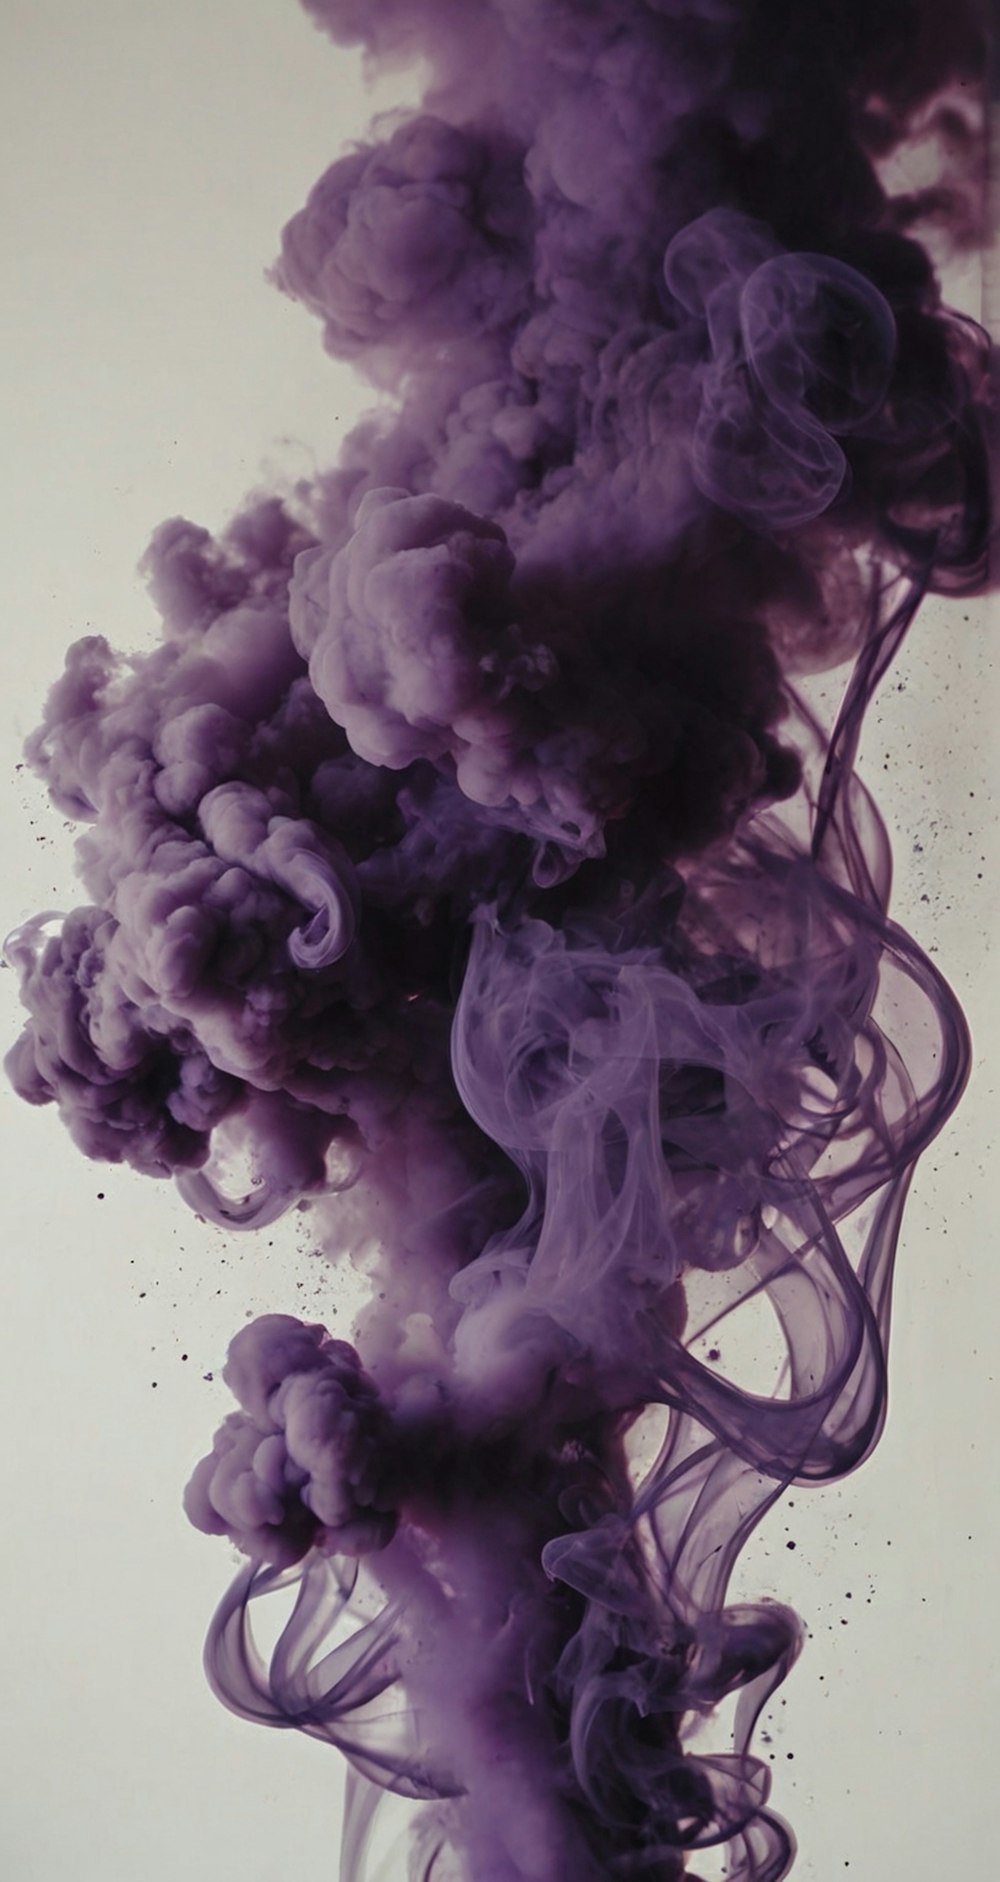 a purple smoke cloud floating in the air